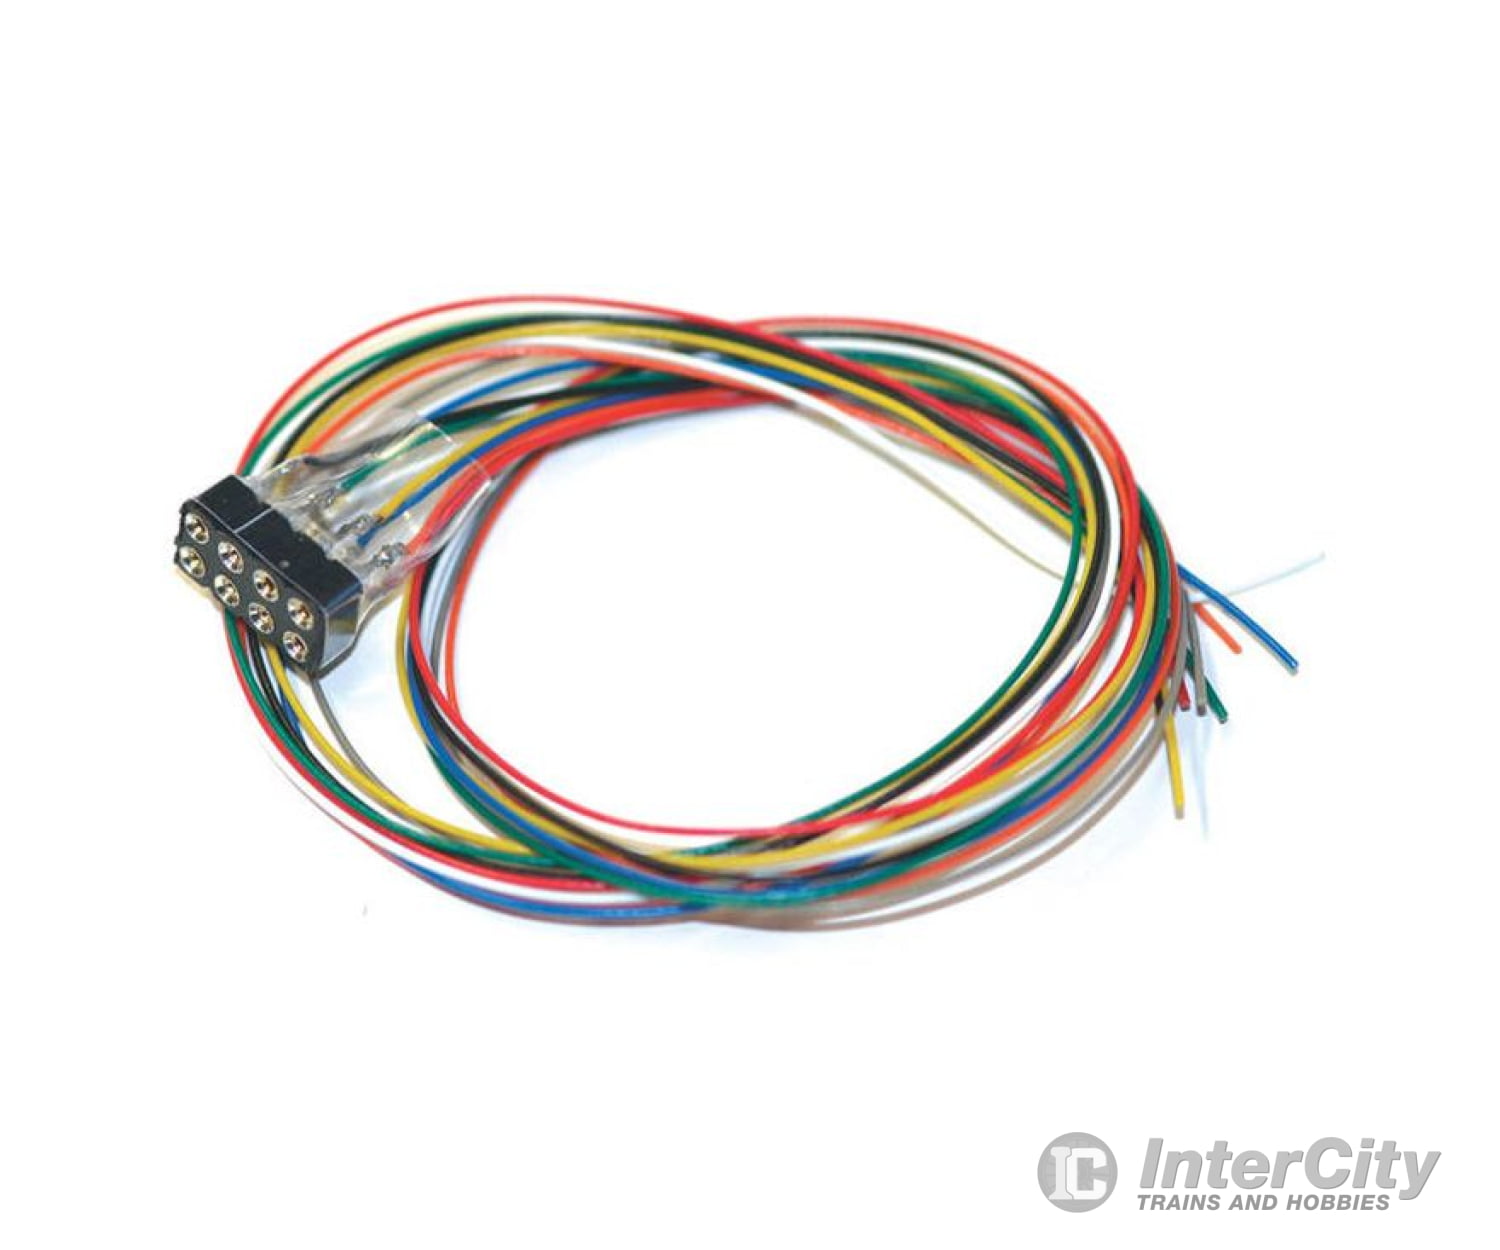 Esu 51950 Dcc Decoder Cable Harness With Nem652 - Nmra 8 - Pin Socket - - 11 - 13/16’ 30Cm Leads